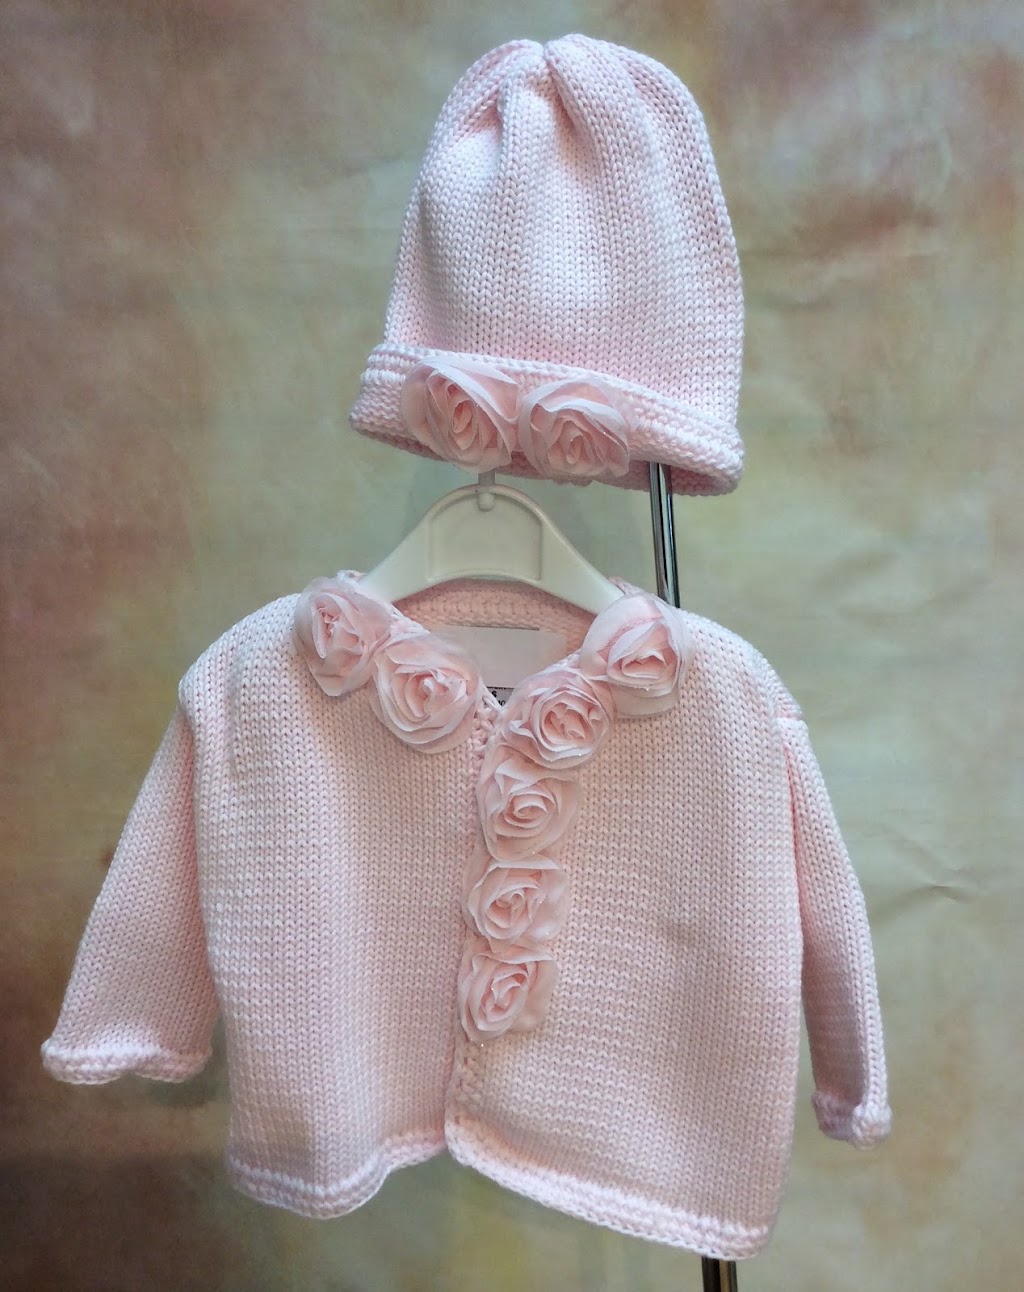 Nenes Lullaby Boutique Inc | 110 Greentree Rd Suite D, Turnersville, NJ 08012 | Phone: (856) 302-5122